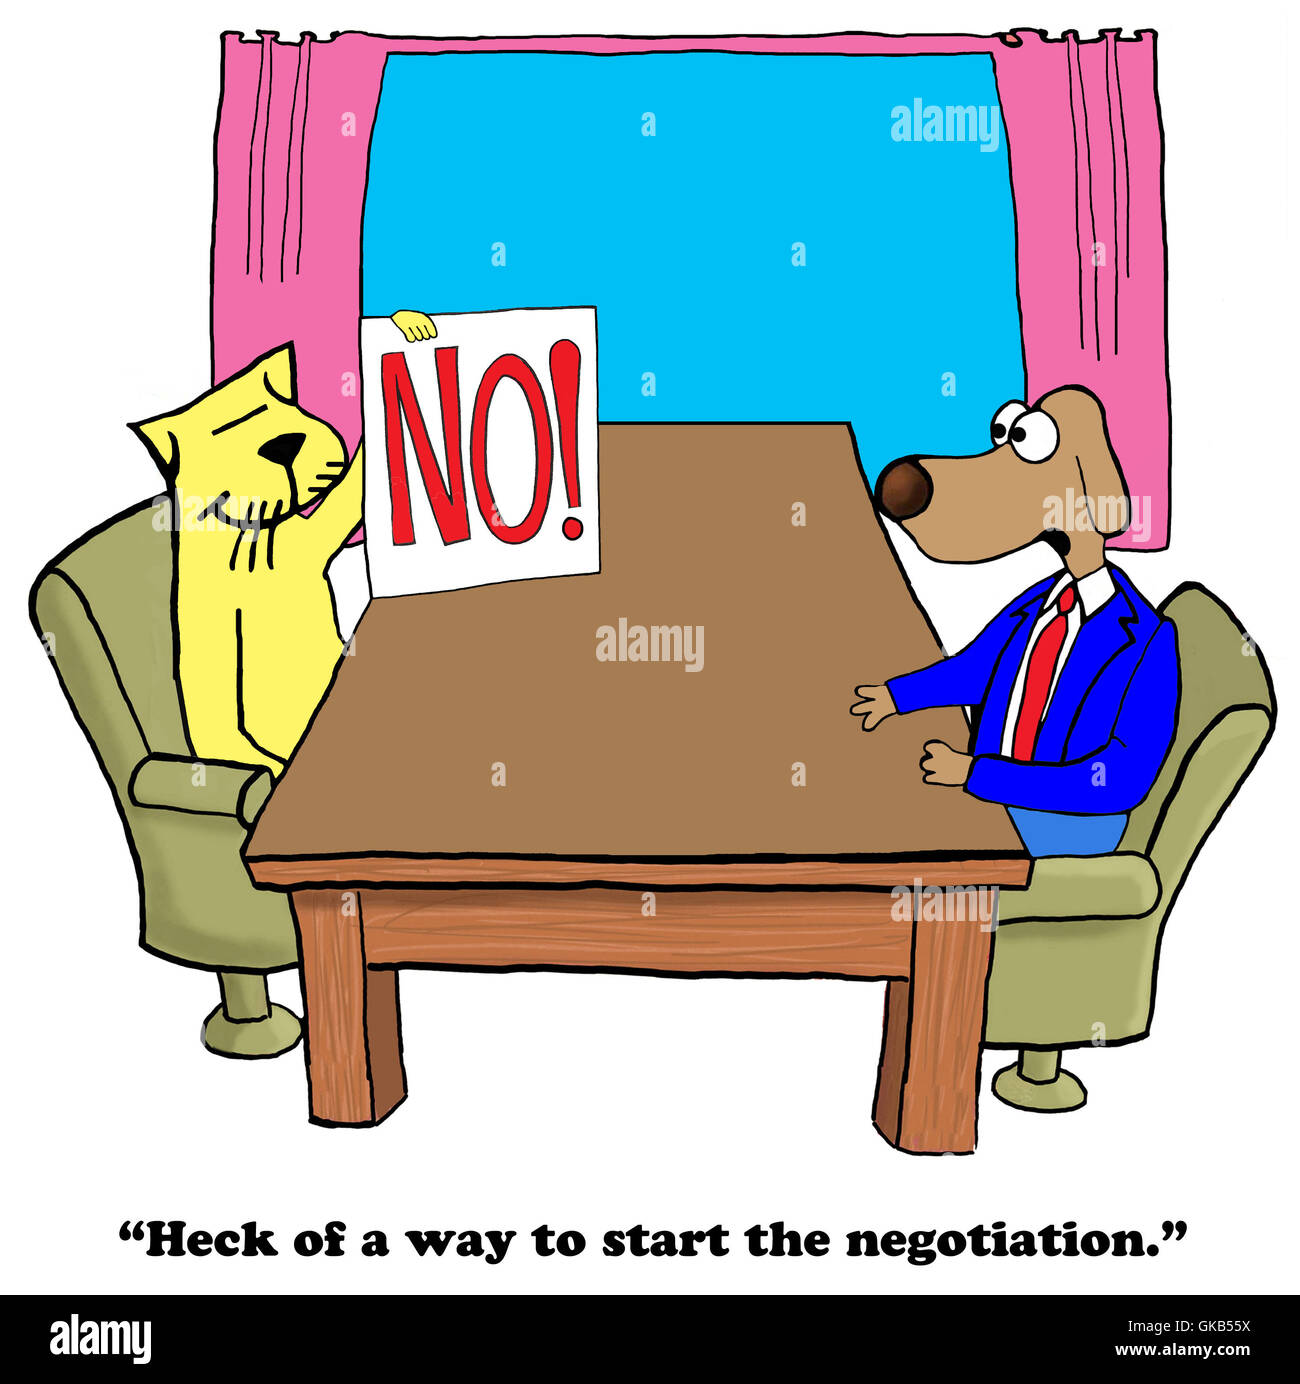 Cartoon about the lack of compromise in a negotiation. Stock Photo